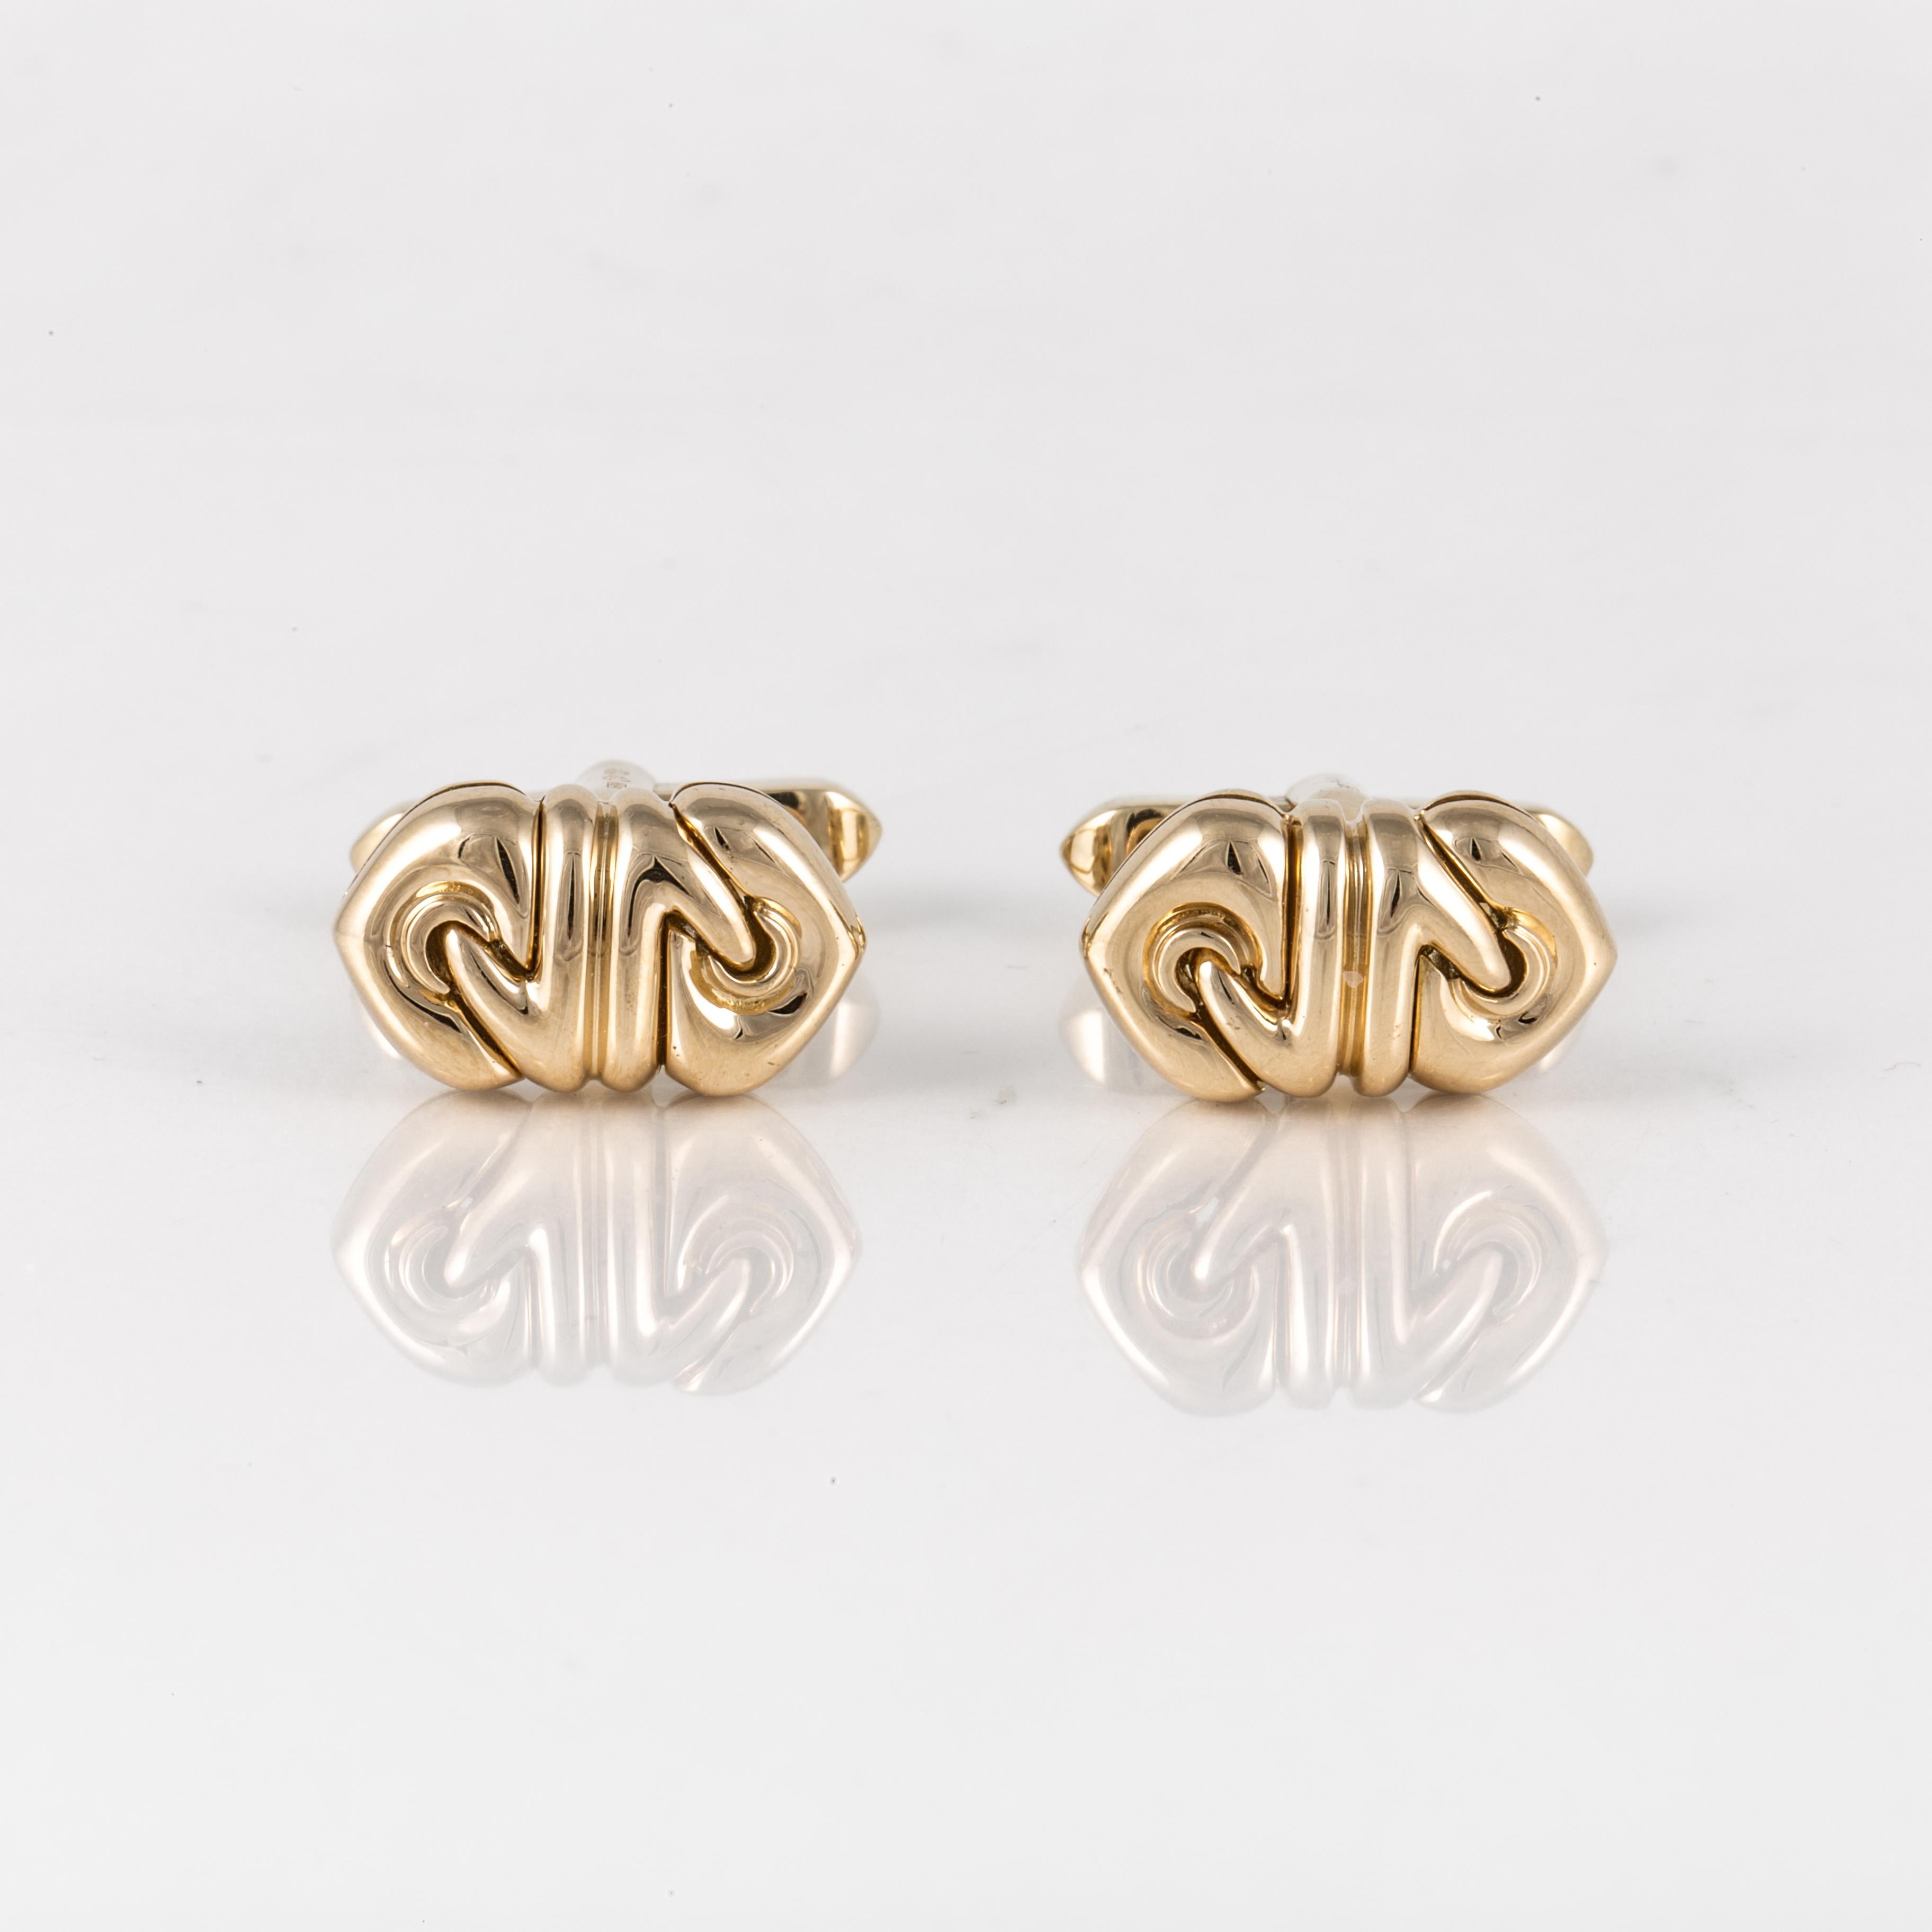  Bulgari Doppio Cuore 18K yellow gold cufflinks.  They measure 3/4 inches long and 3/8 inches wide.  